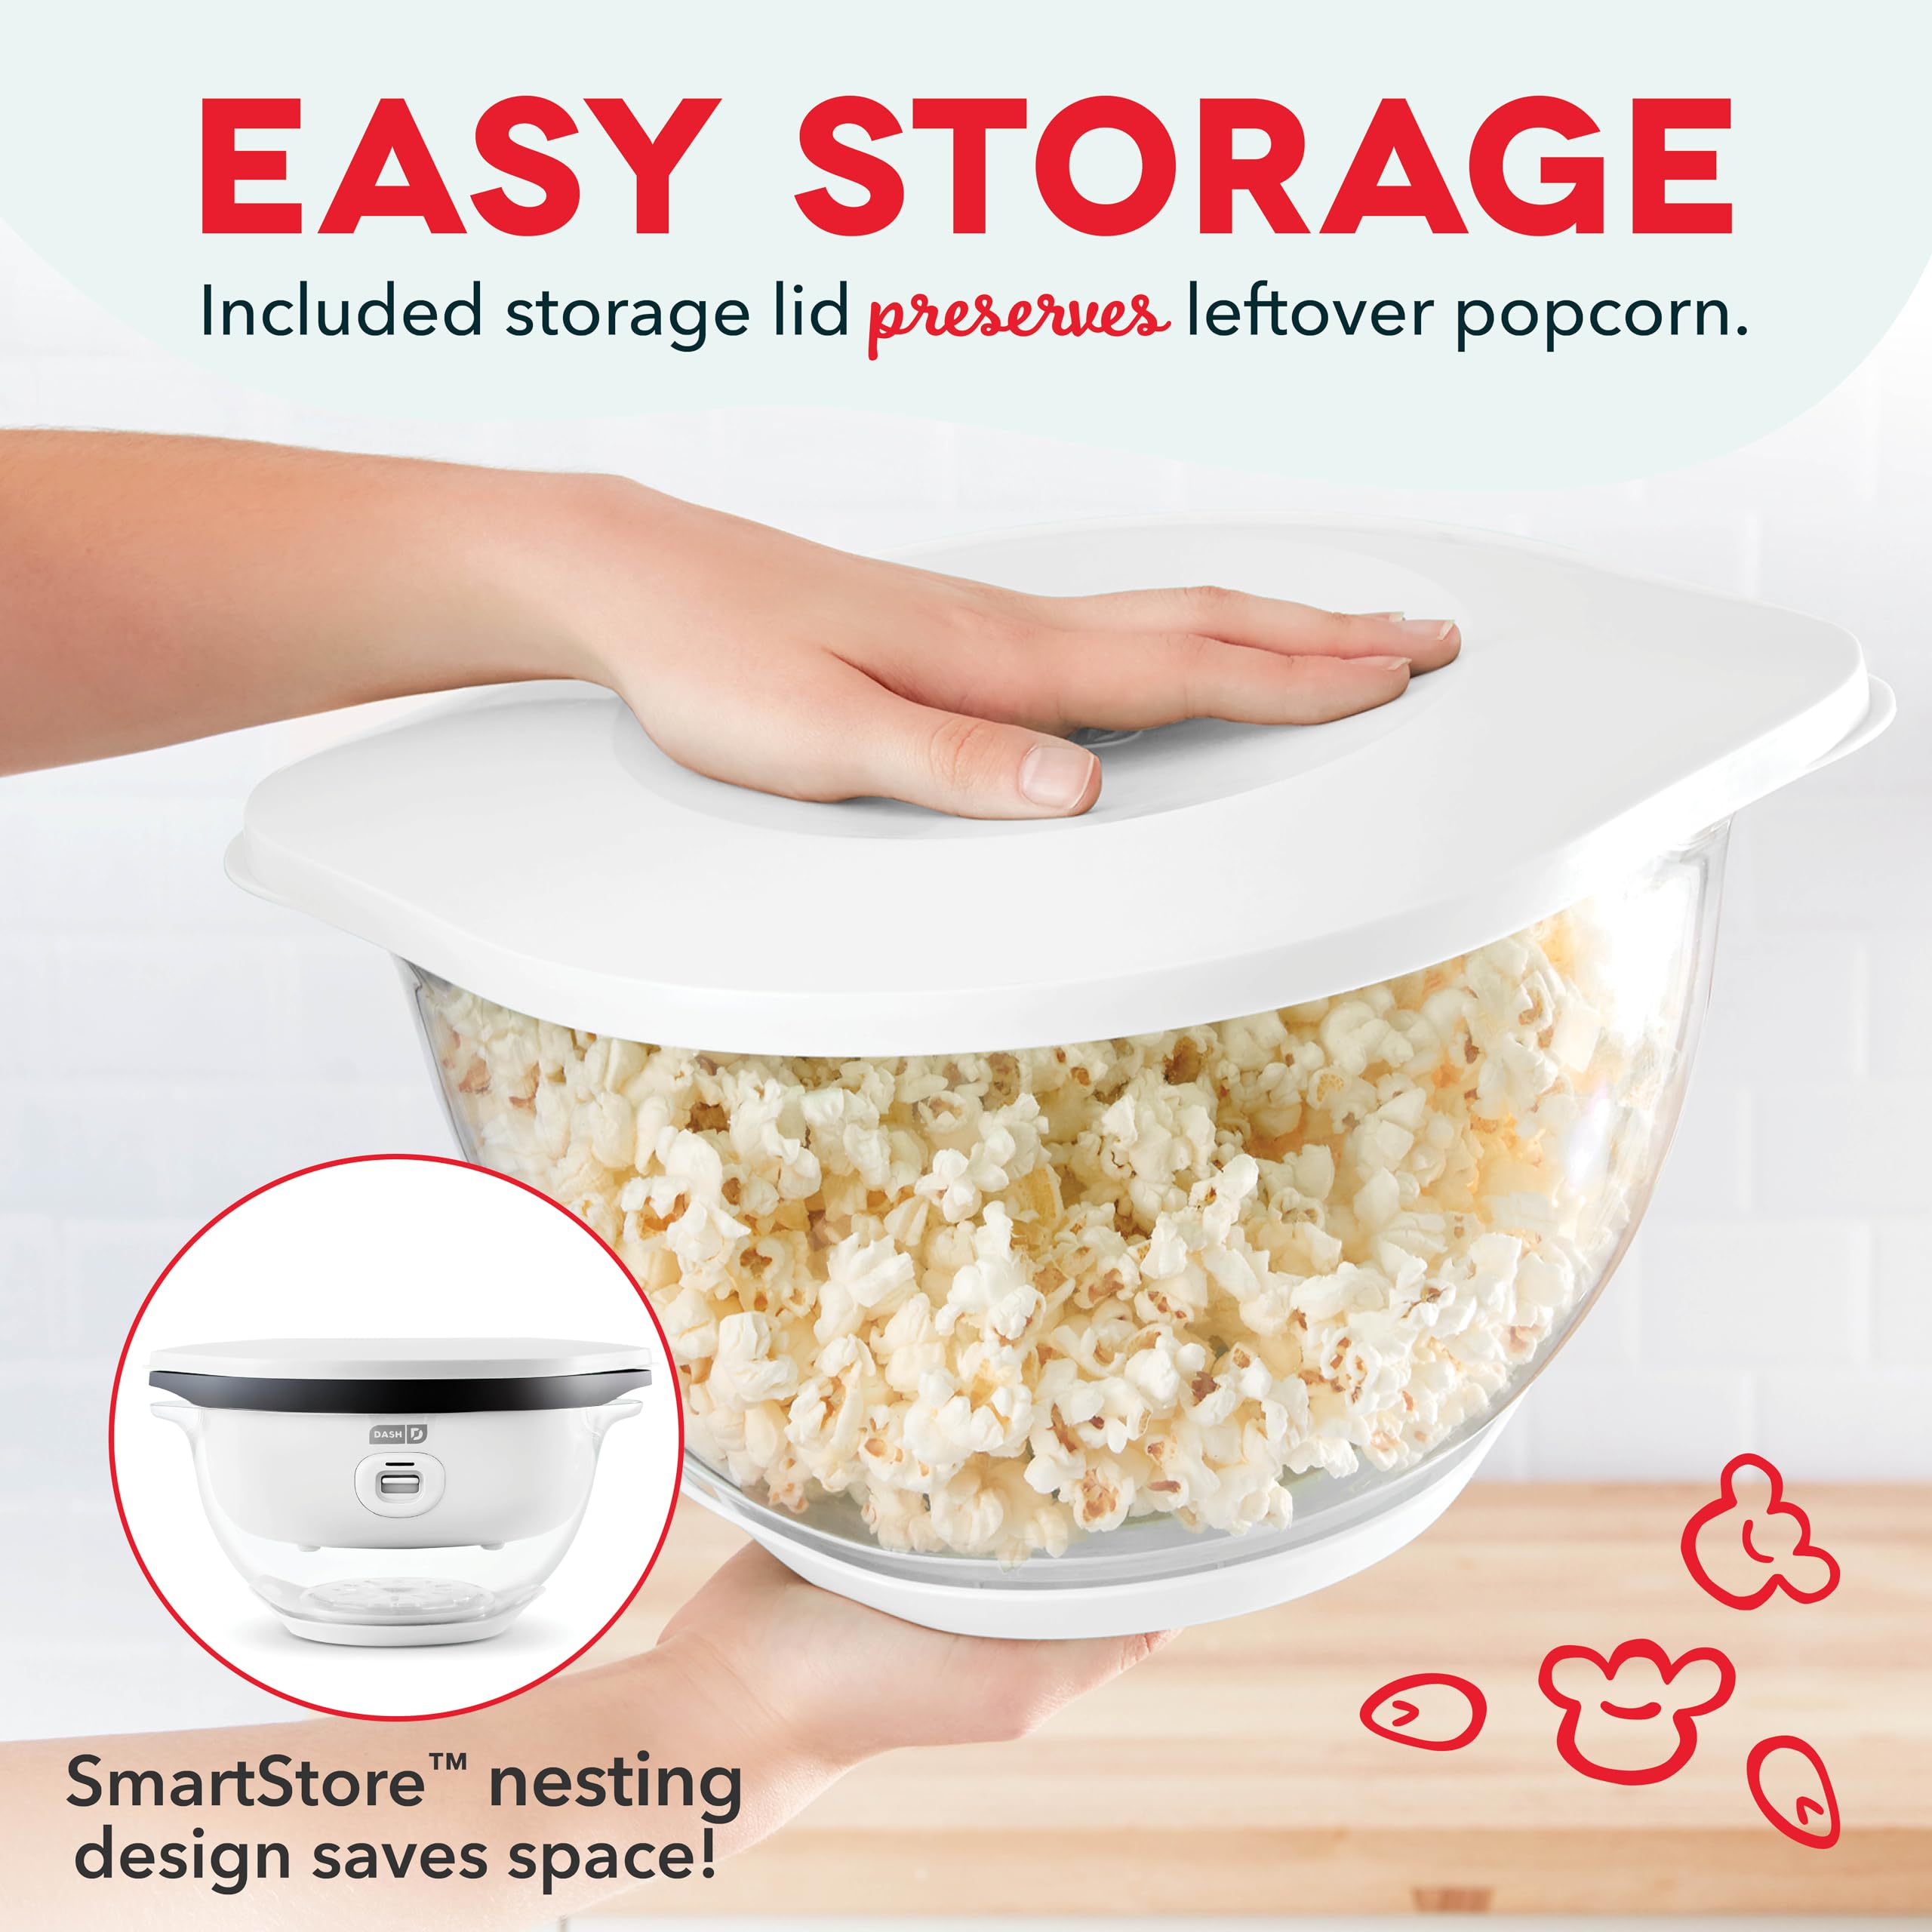 DASH SmartStore™ Deluxe Stirring Popcorn Maker, Hot Oil Electric Popcorn Machine with Large Lid for Serving Bowl and Convenient Storage, 24 Cups – White